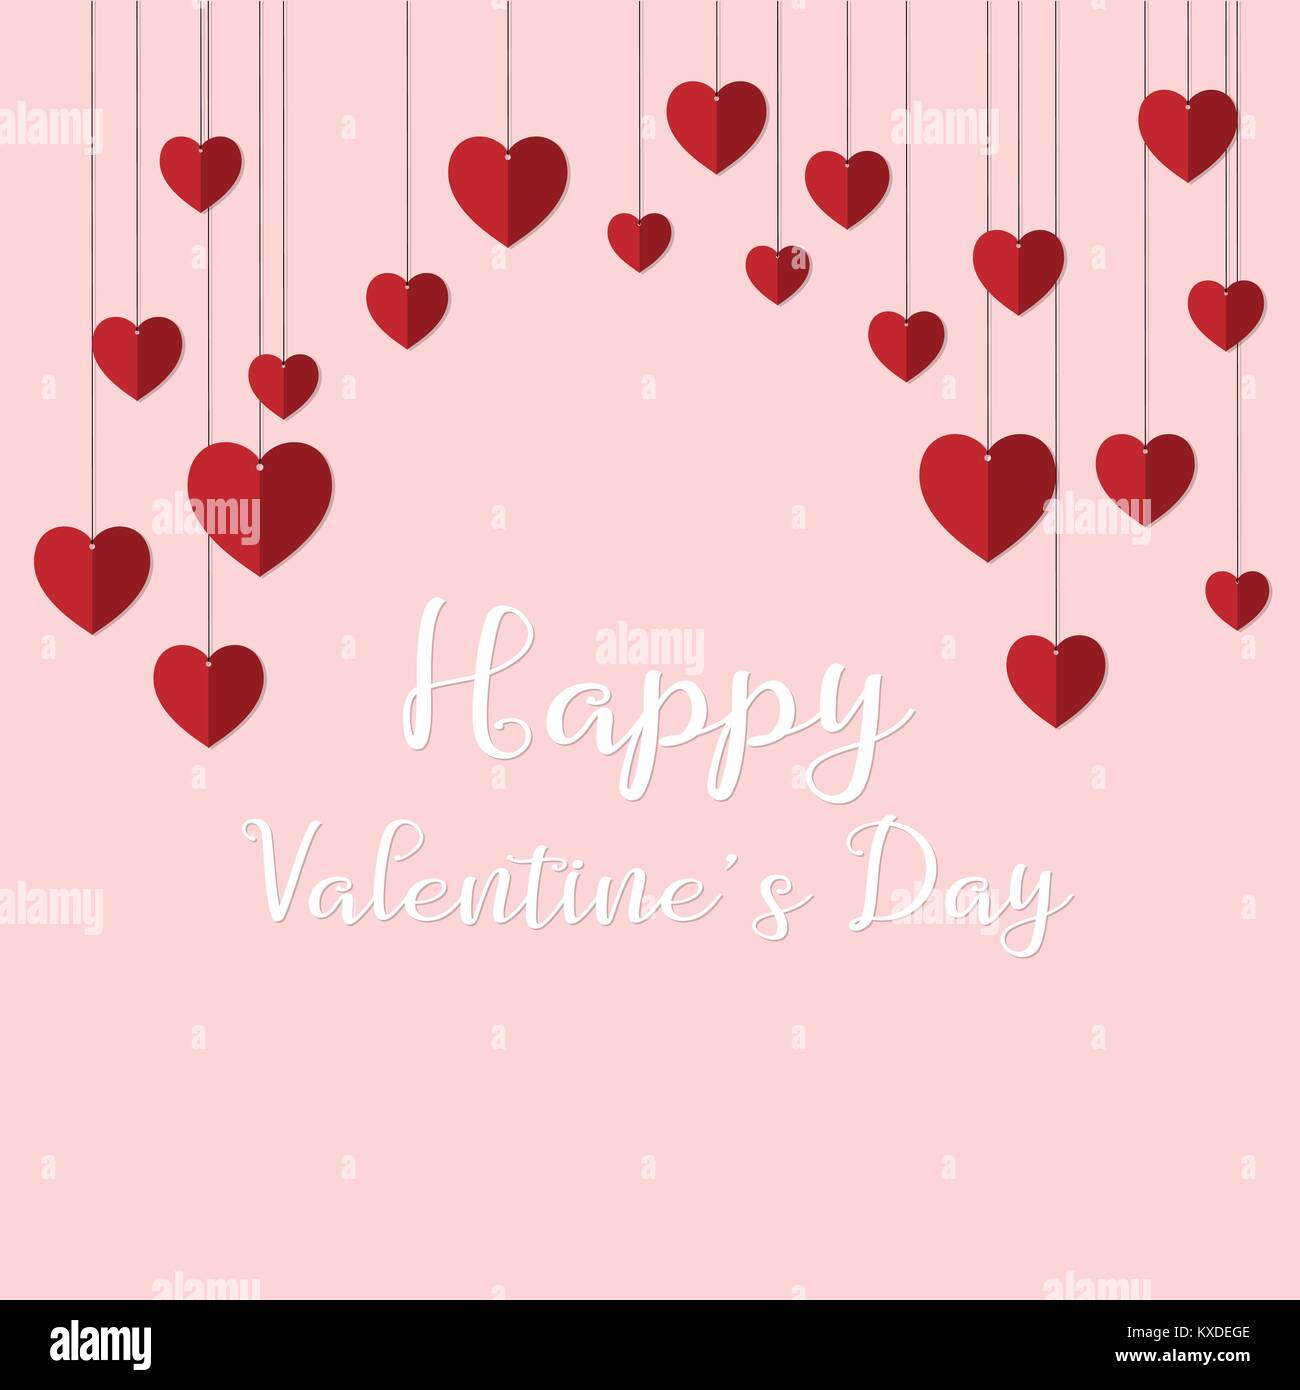 Happy valentine's day background with hanging red paper cut heart shape. Vector illustration. Stock Vector